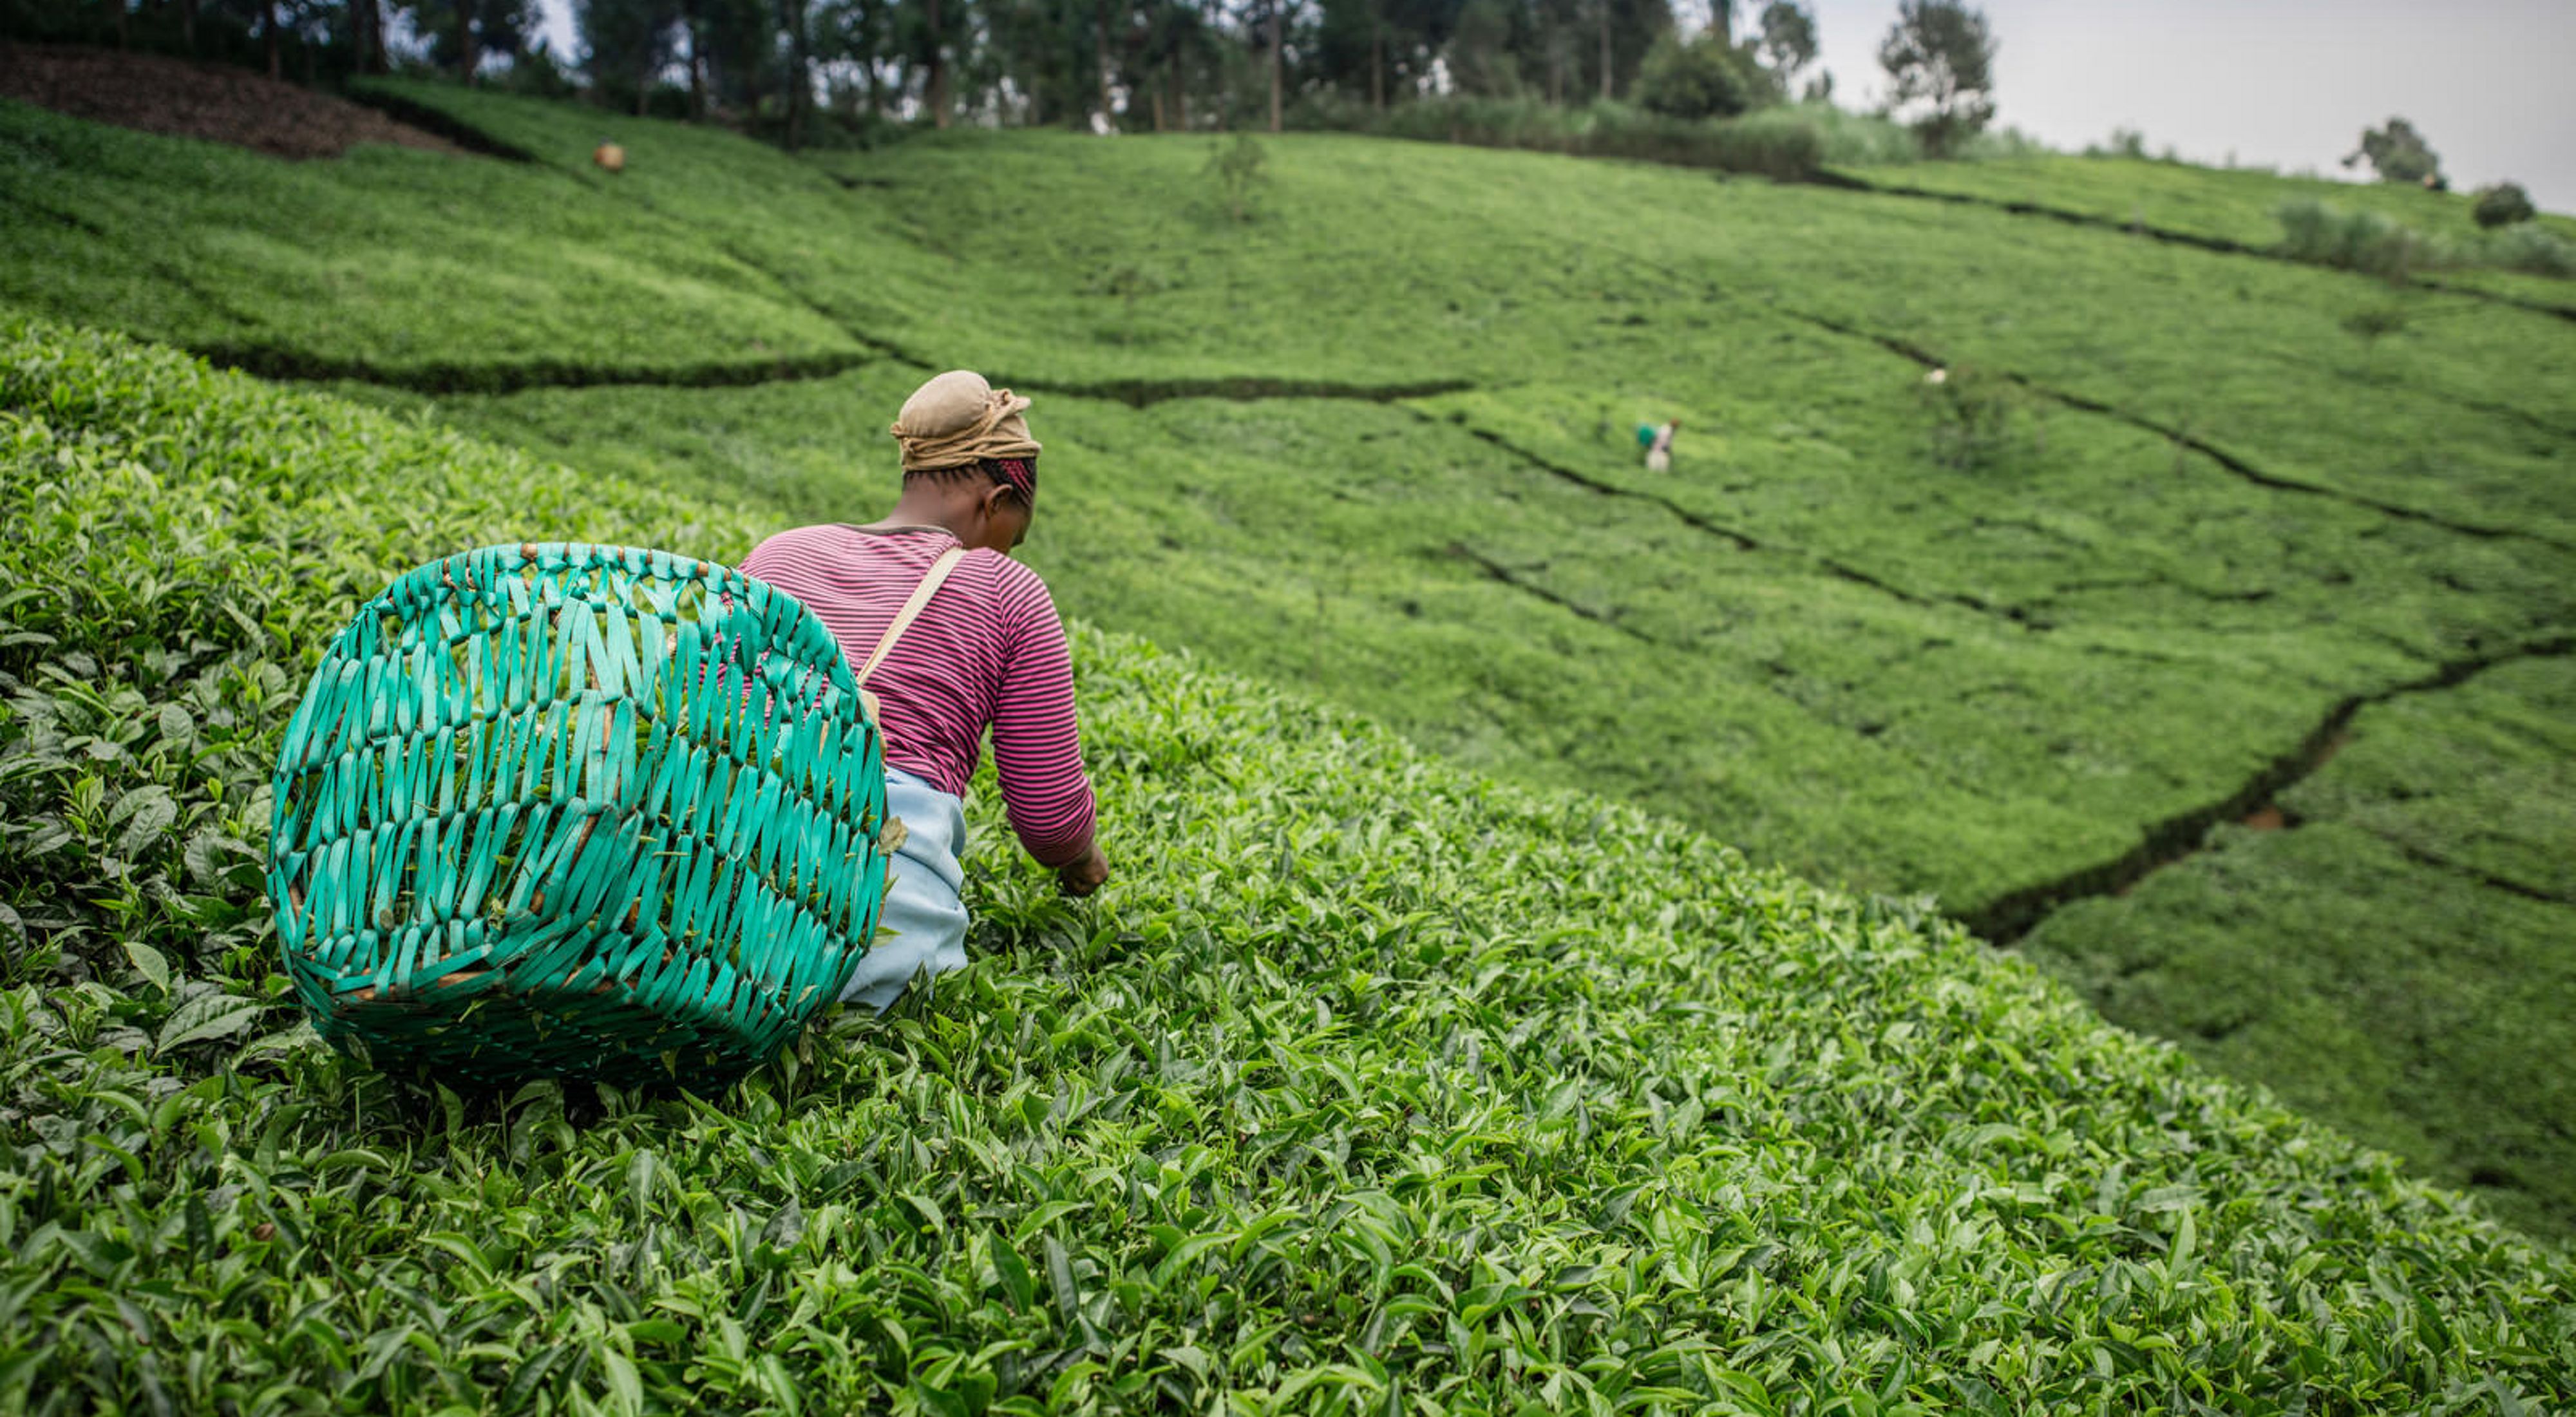 A woman with a basket on her back picks tea leaves in a green tea field.